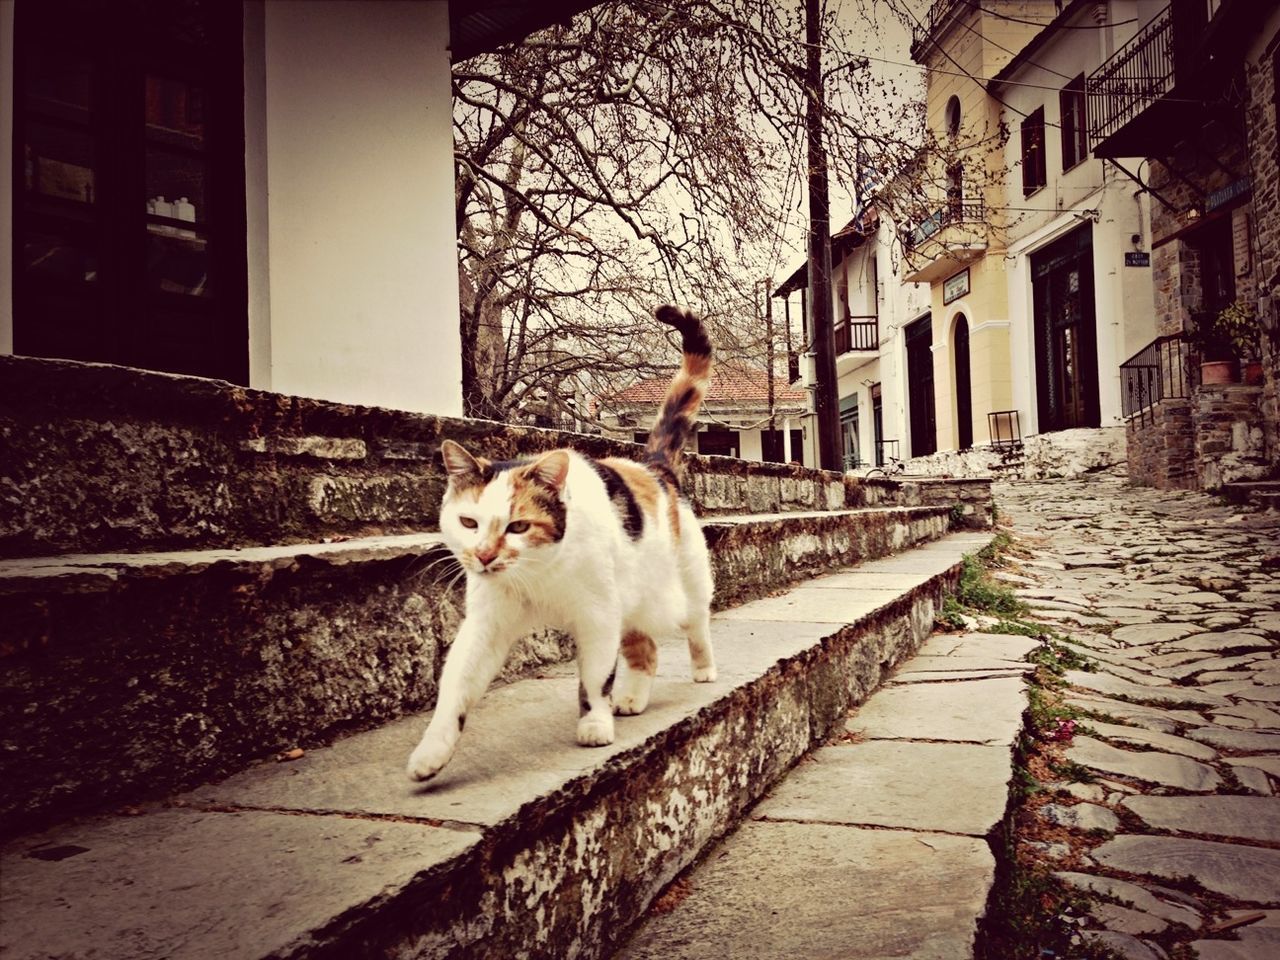 pets, domestic animals, one animal, animal themes, mammal, building exterior, built structure, architecture, dog, domestic cat, cat, full length, street, sitting, house, cobblestone, sidewalk, stray animal, looking at camera, footpath